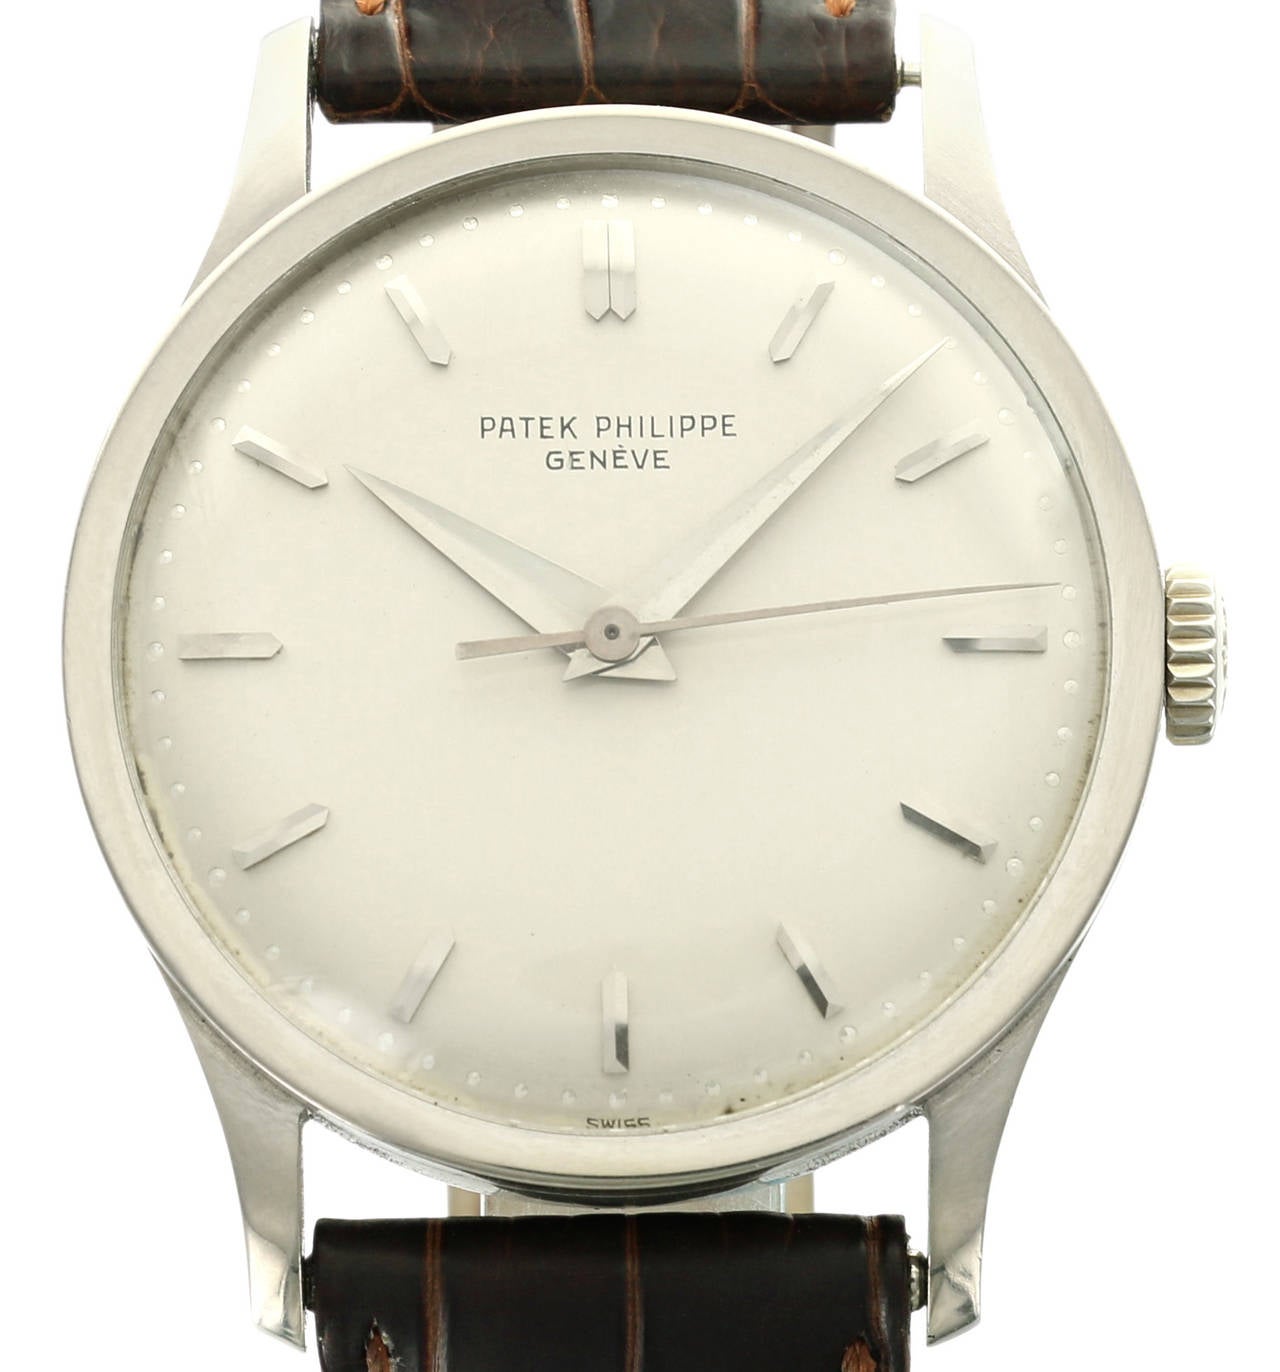 The Patek Philippe reference 570 is a simple, elegant watch, keeping with the traditions of the Calatrava models. This particular 570 has a white gold case in excellent shape with a crocodile strap.